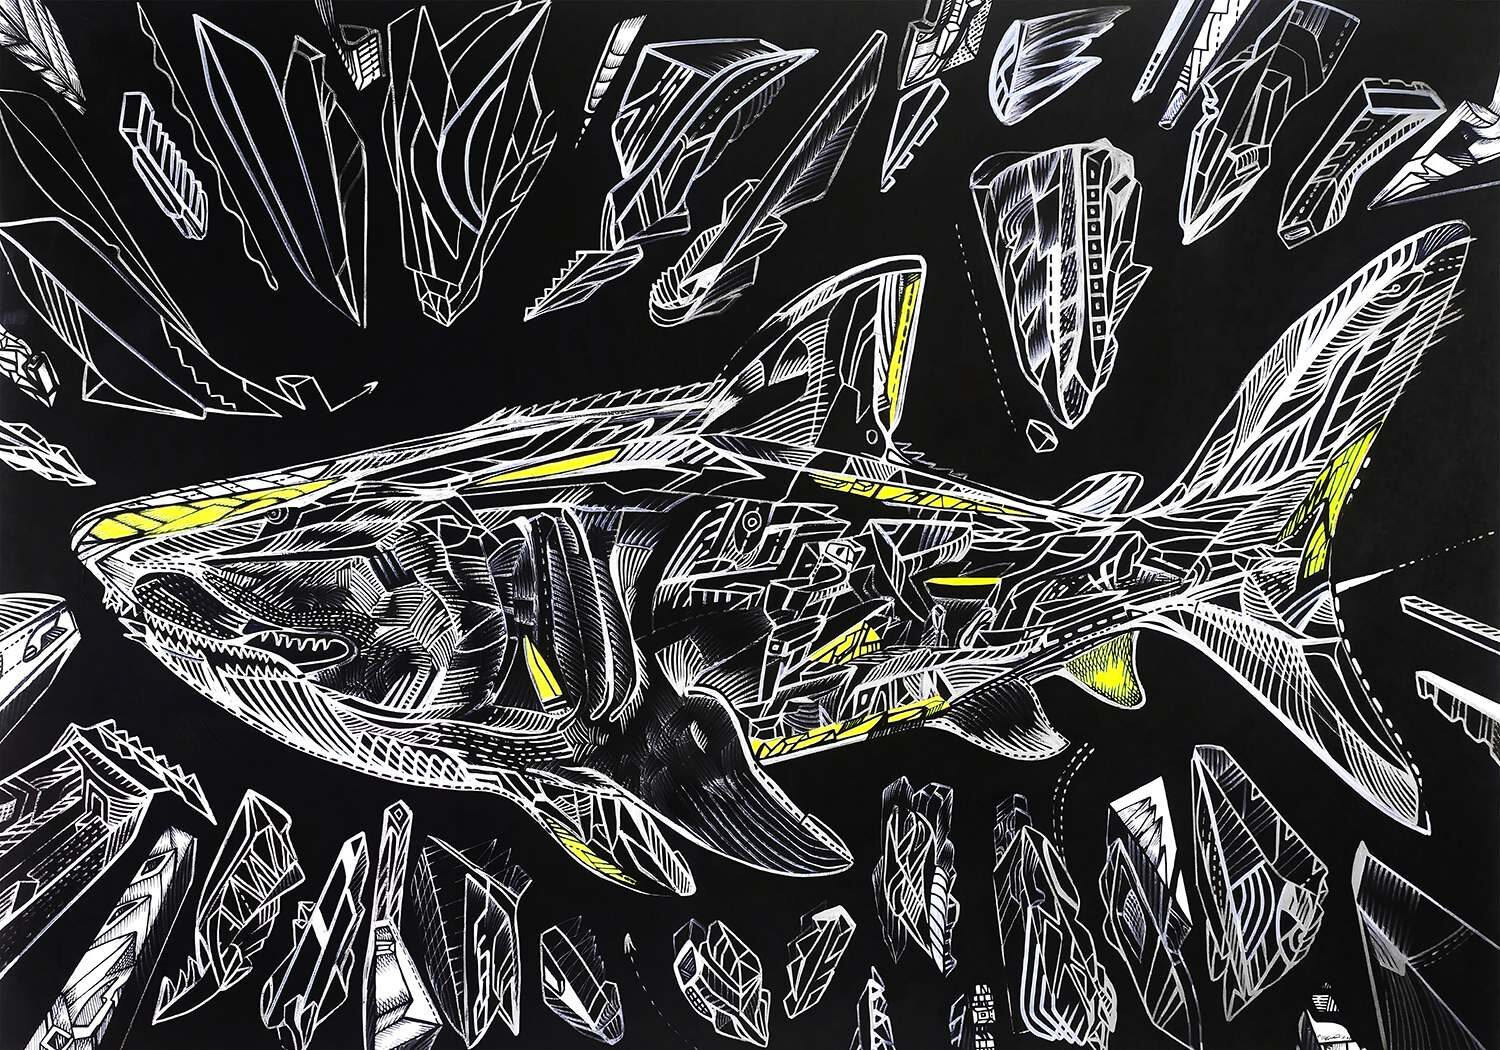 THE ANATOMY OF THE SEA is ashark painting, made on a black board with white and red drawing in acrylic. It is a work of Serbian artist Marko Gavrilovic.